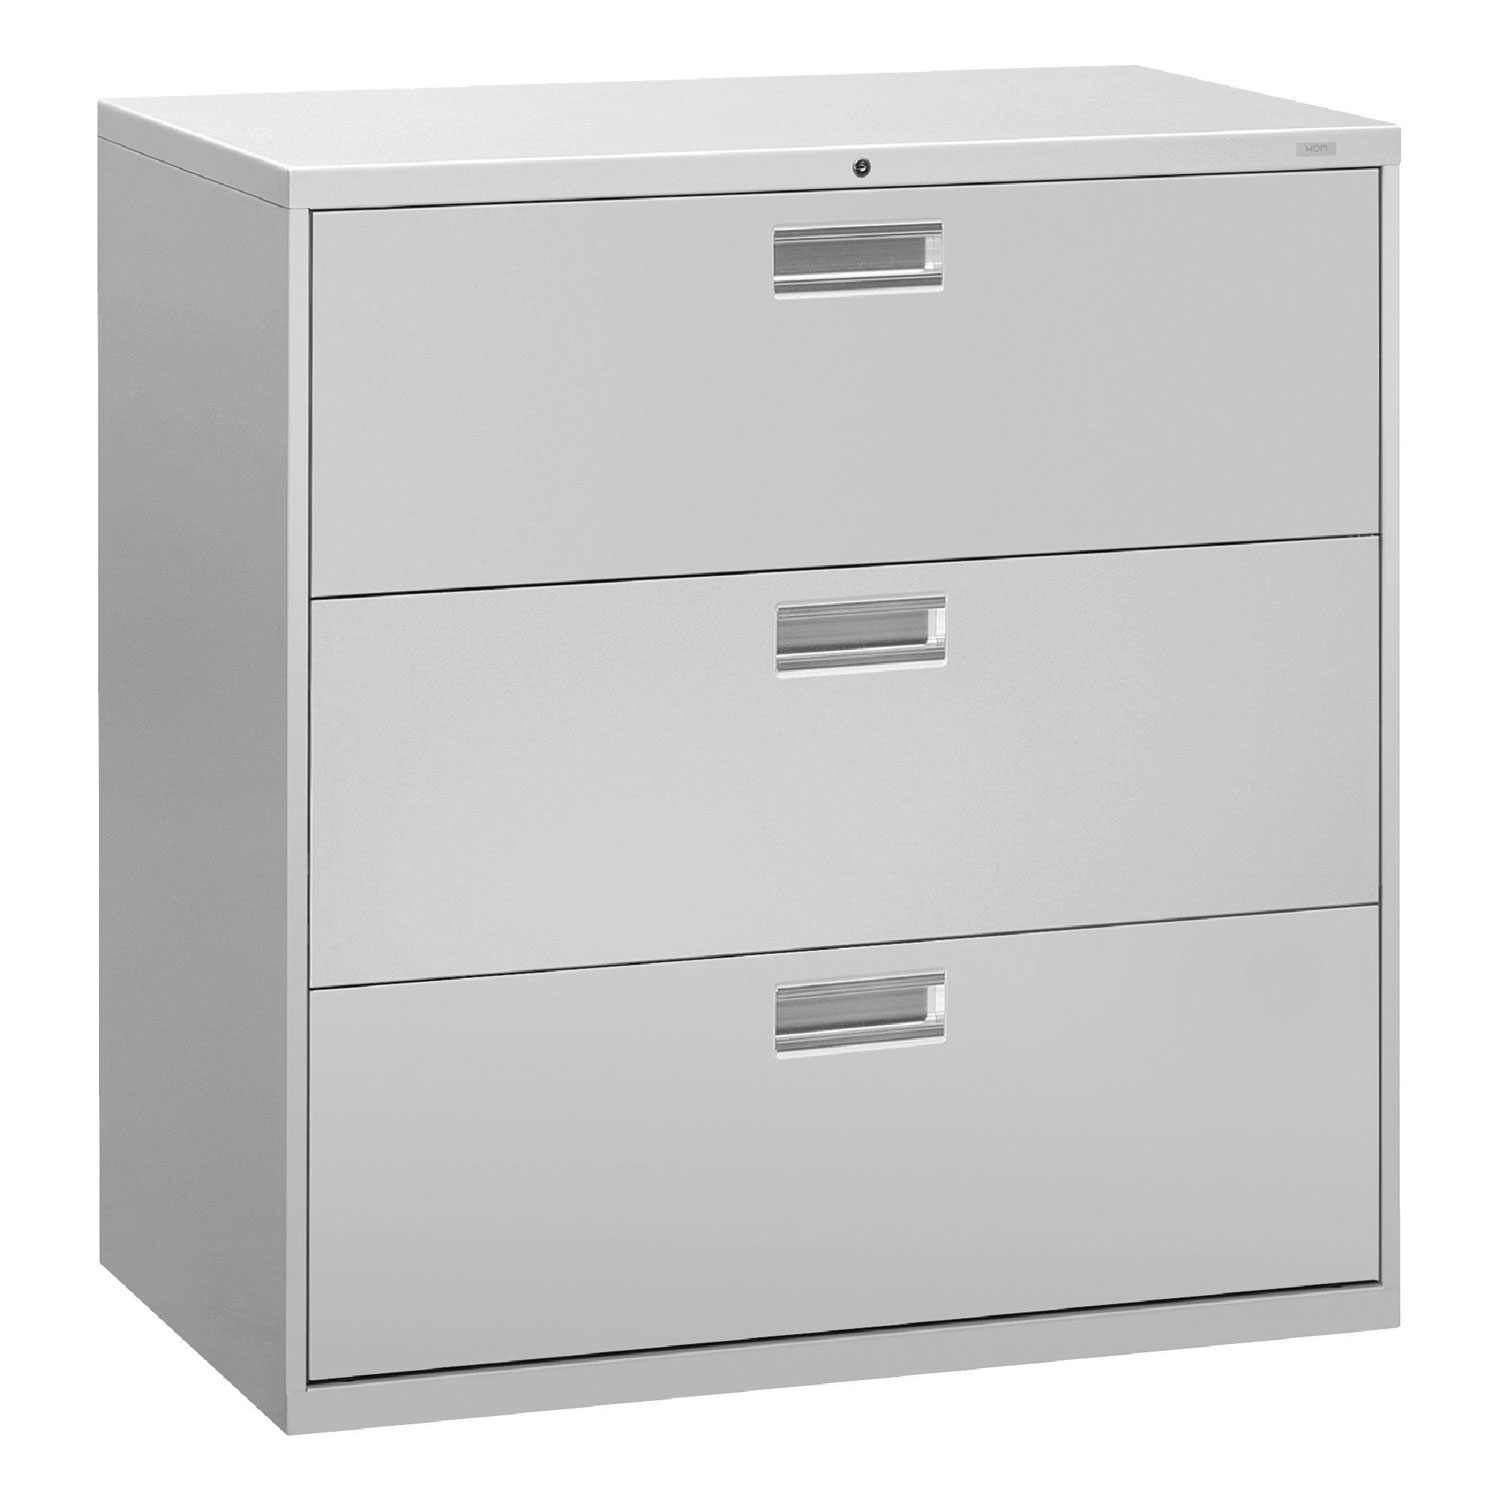 600 Series Three-Drawer Lateral File, 42w x 18d x 39 1/8h, Light Gray